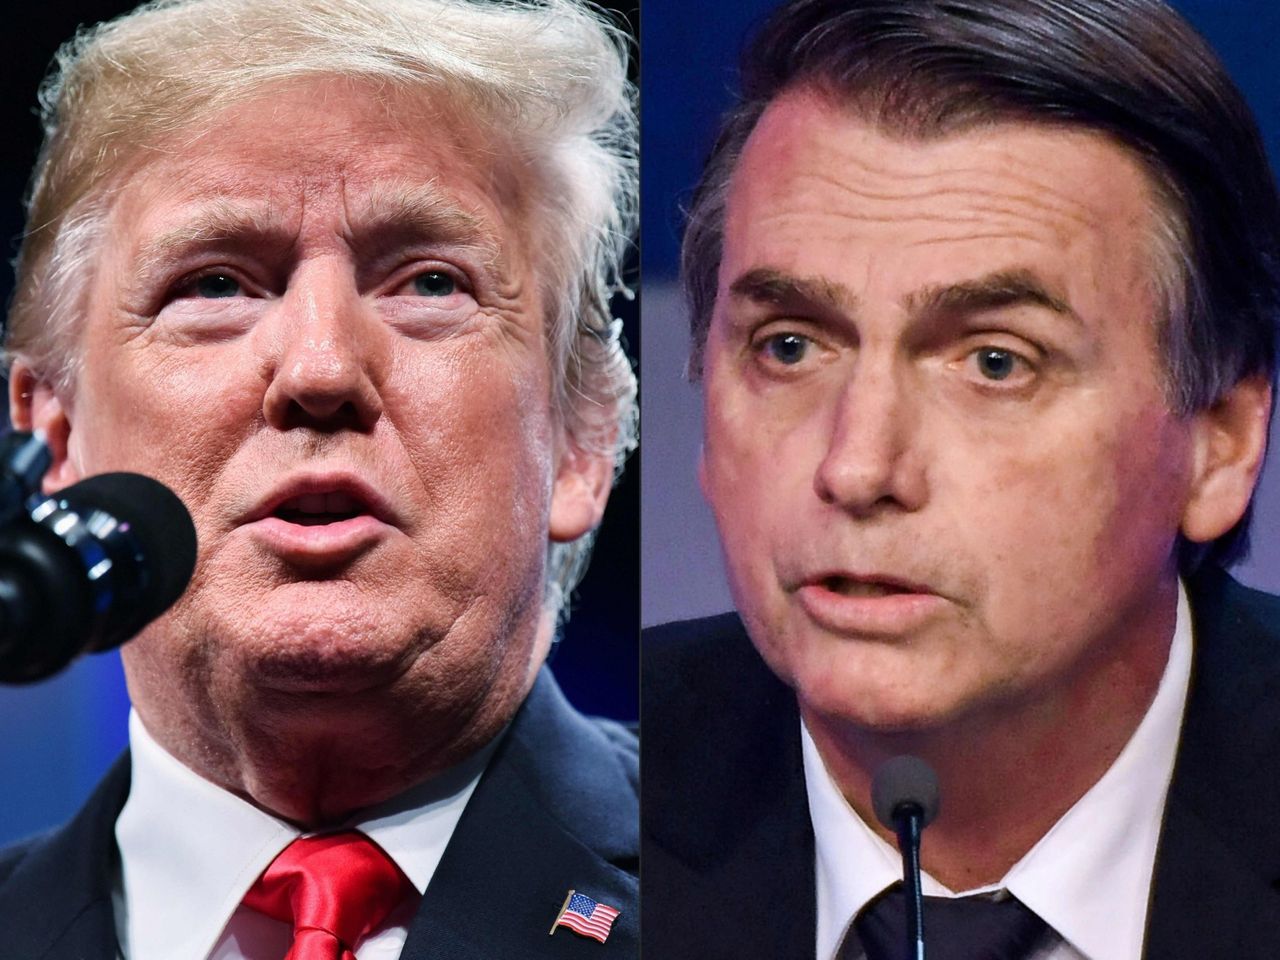 Bolsonaro modeled his rise to power on Donald Trump's. Now, right-wing politicians across Latin America will likely take lessons from Bolsonaro's victory in Brazil.